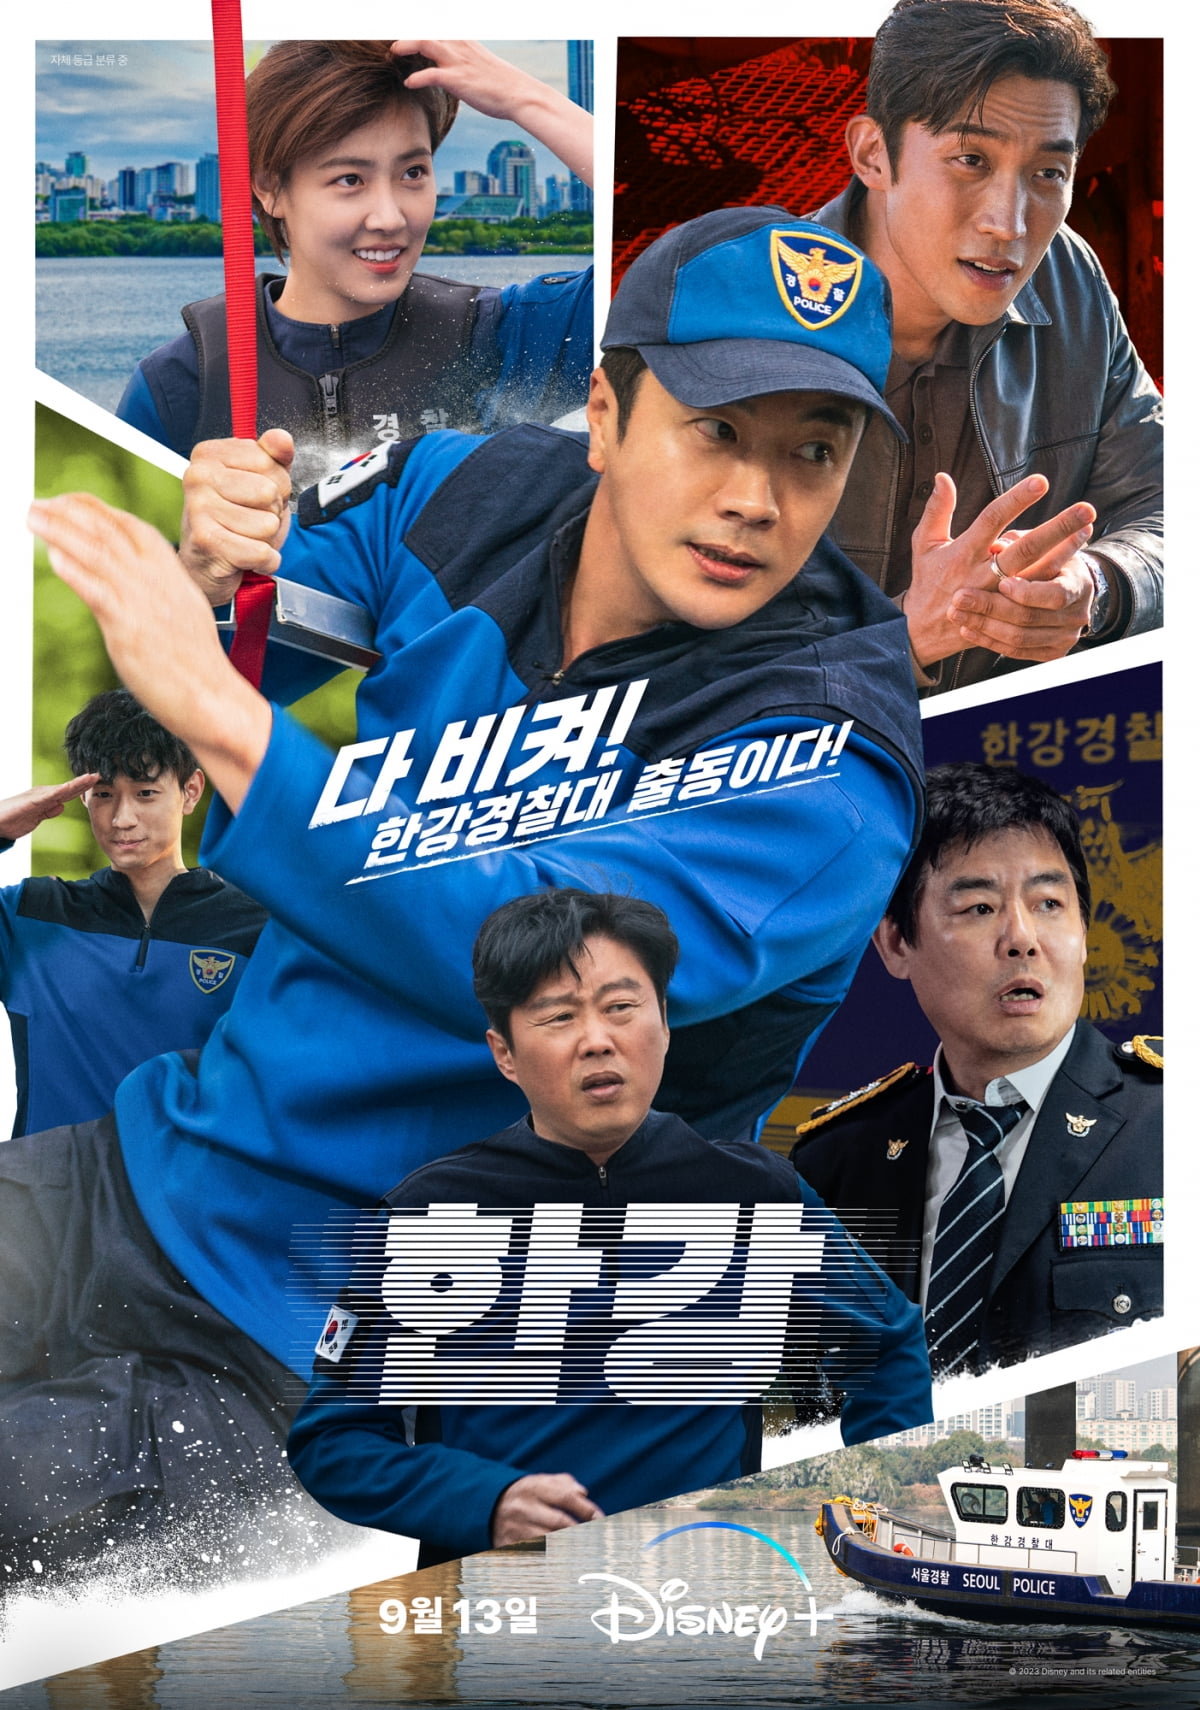 Disney+ 'Han River' to be released on September 13th